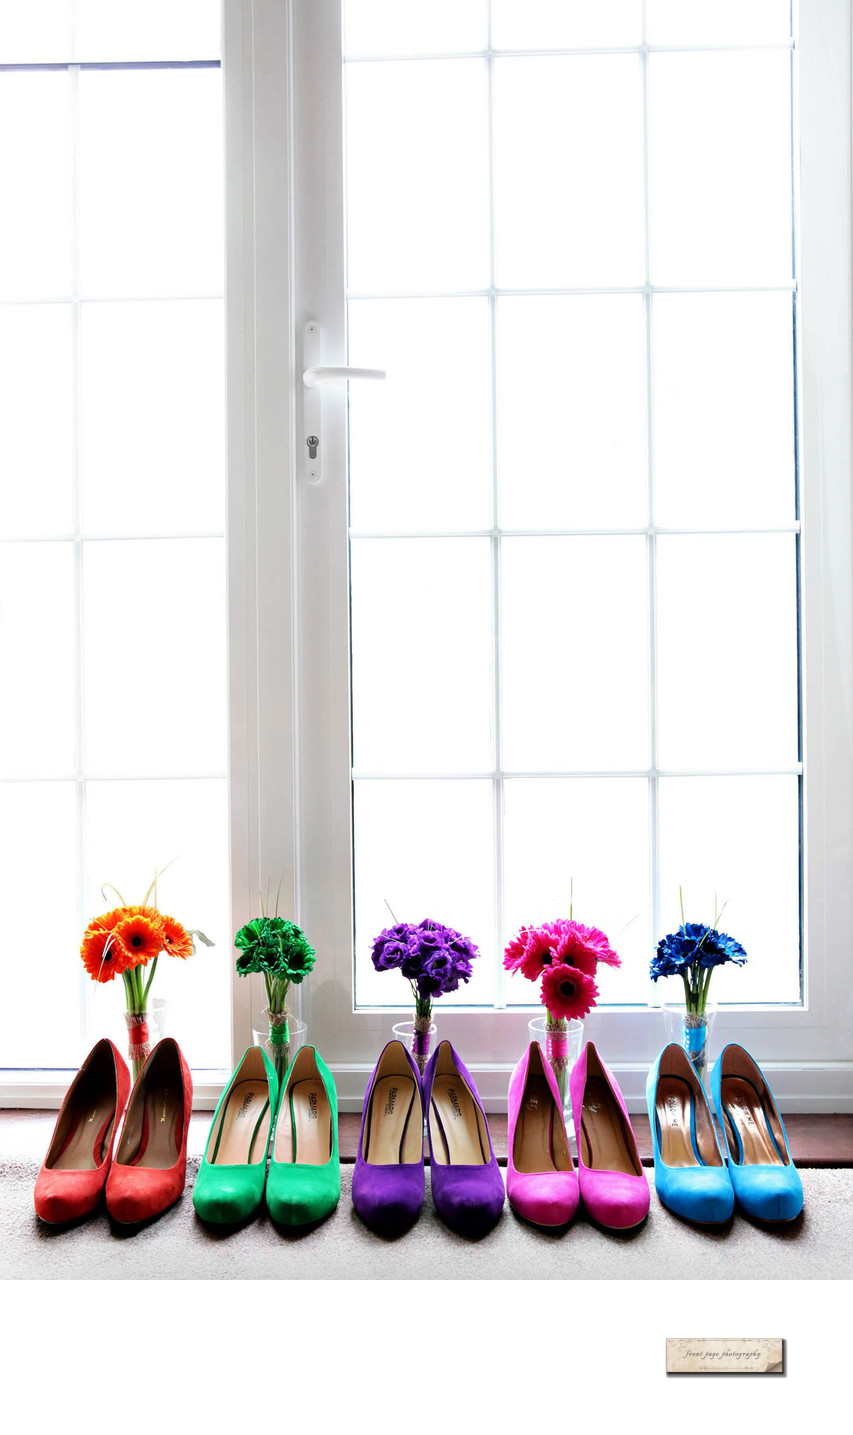 Bridesmaid's shoes and flowers on wedding day